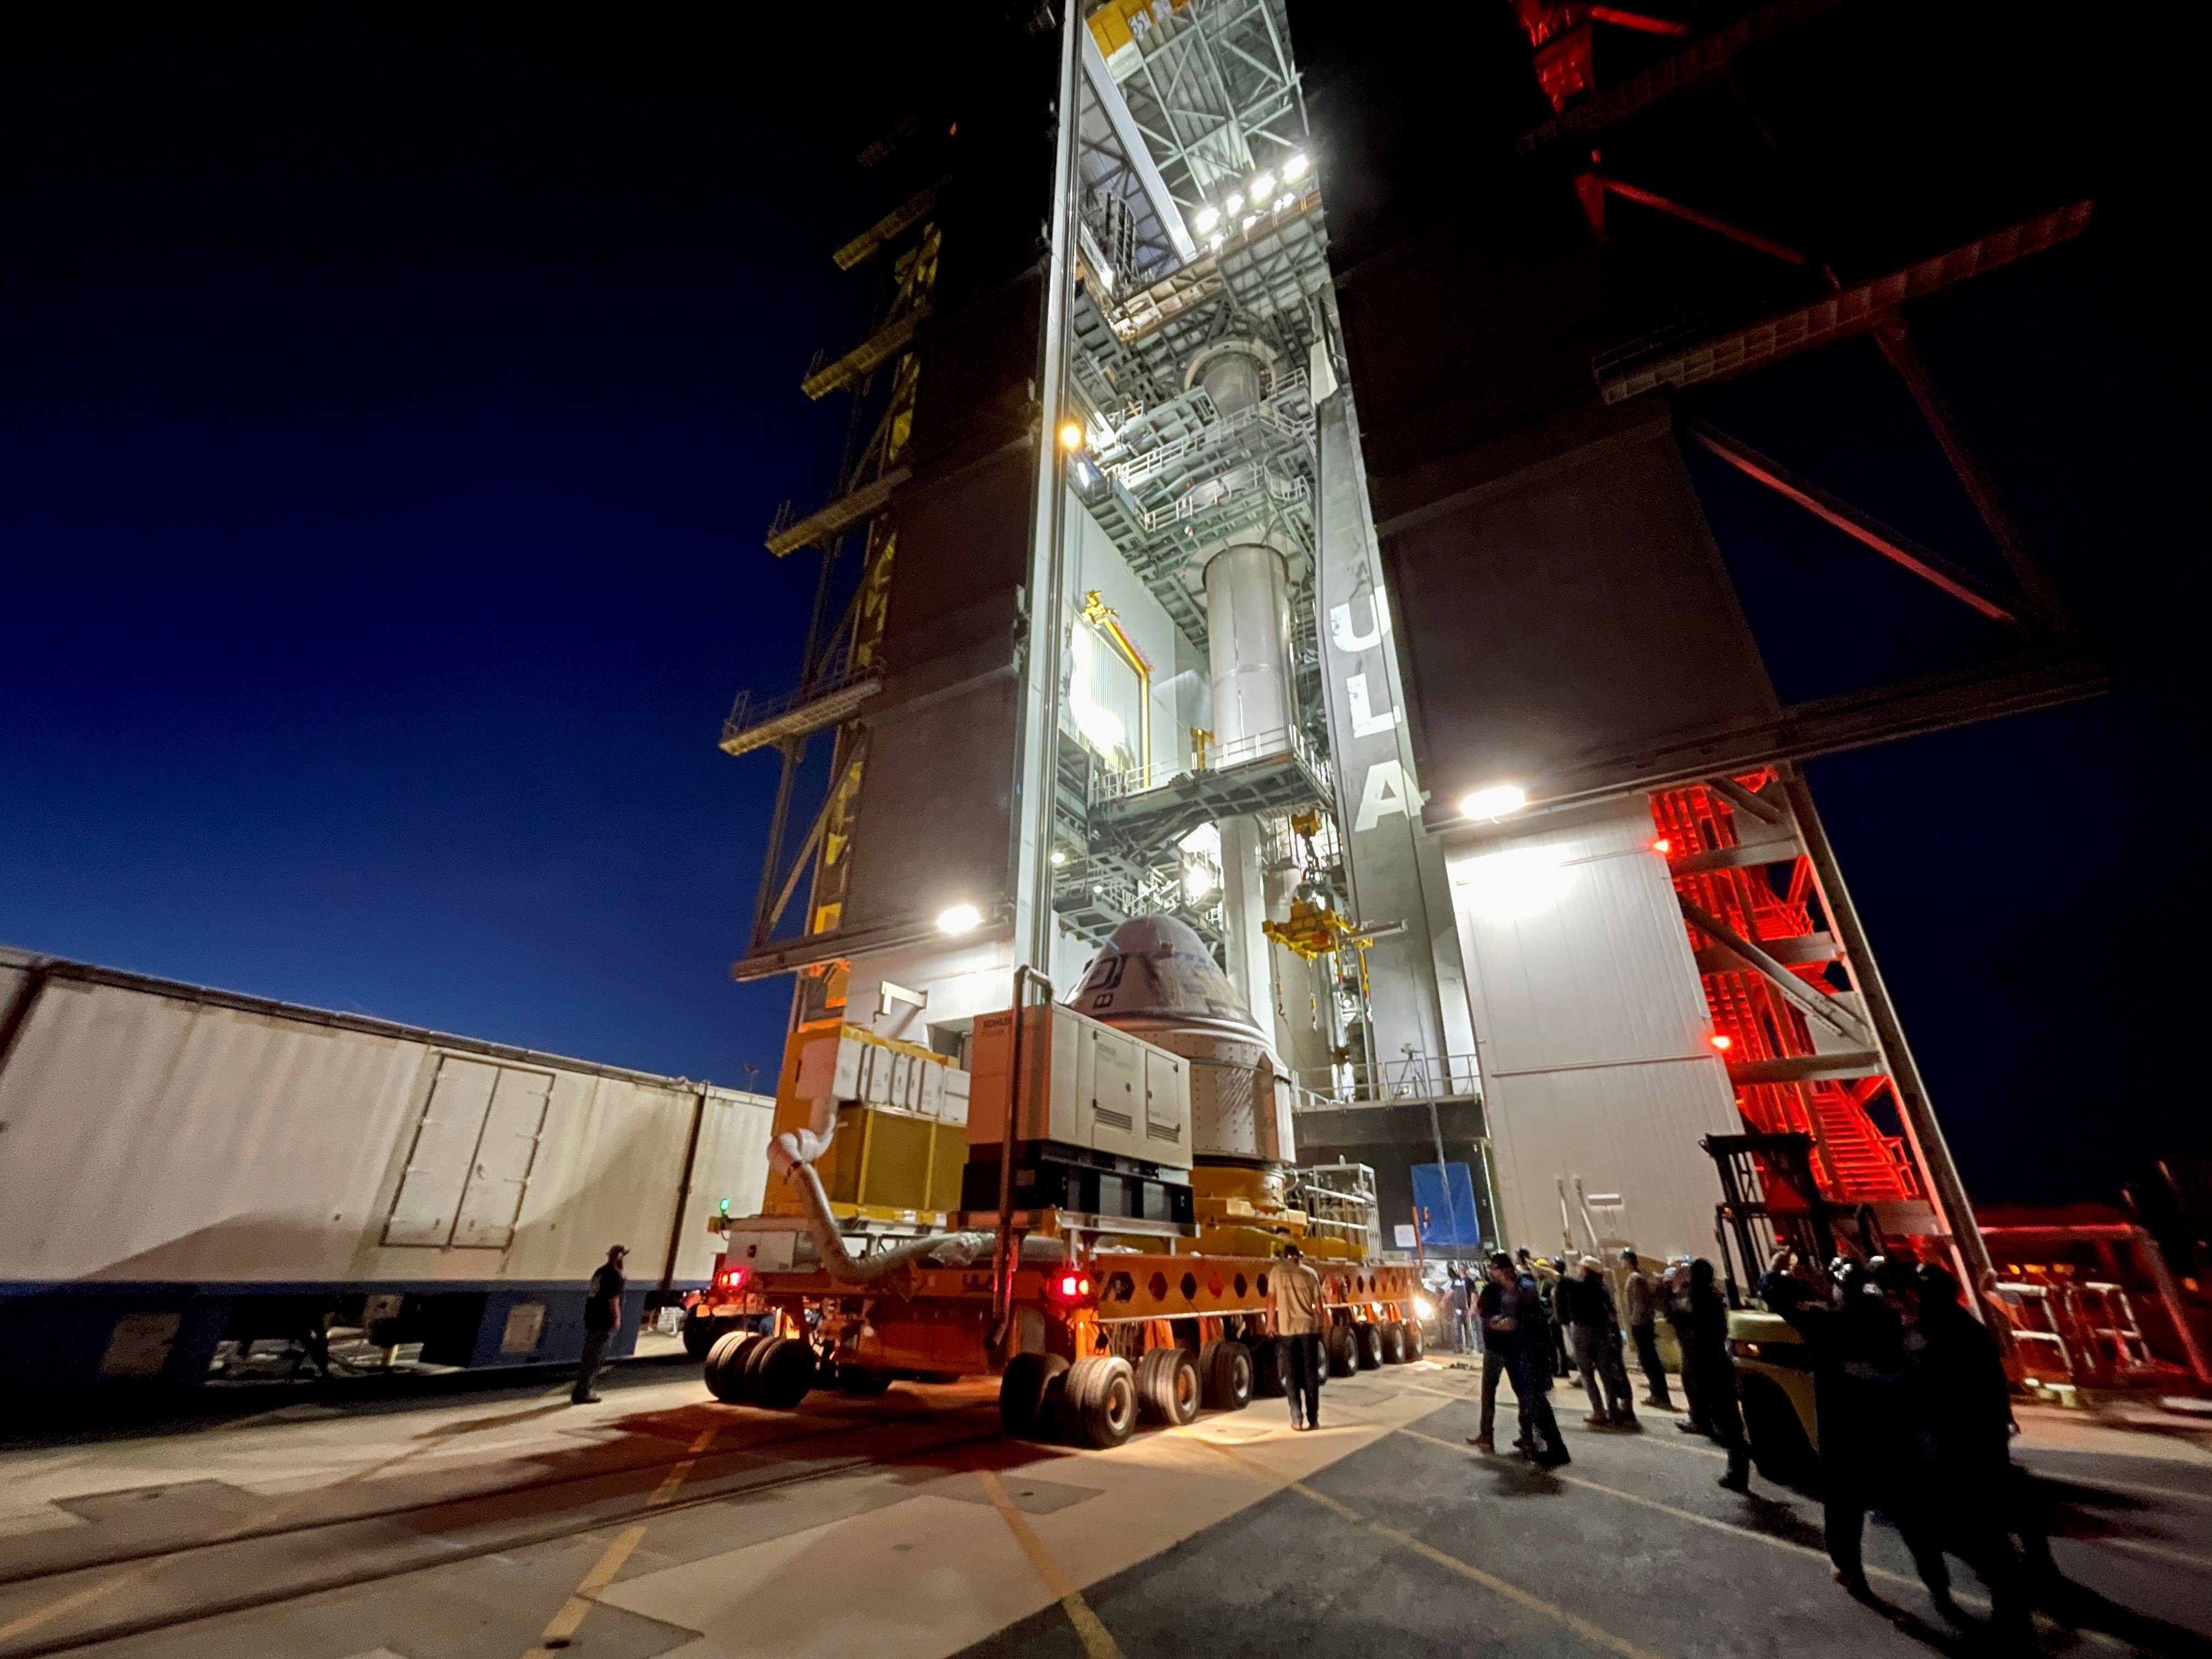 Starliner arrives at the VIF. Photo by United Launch Alliance